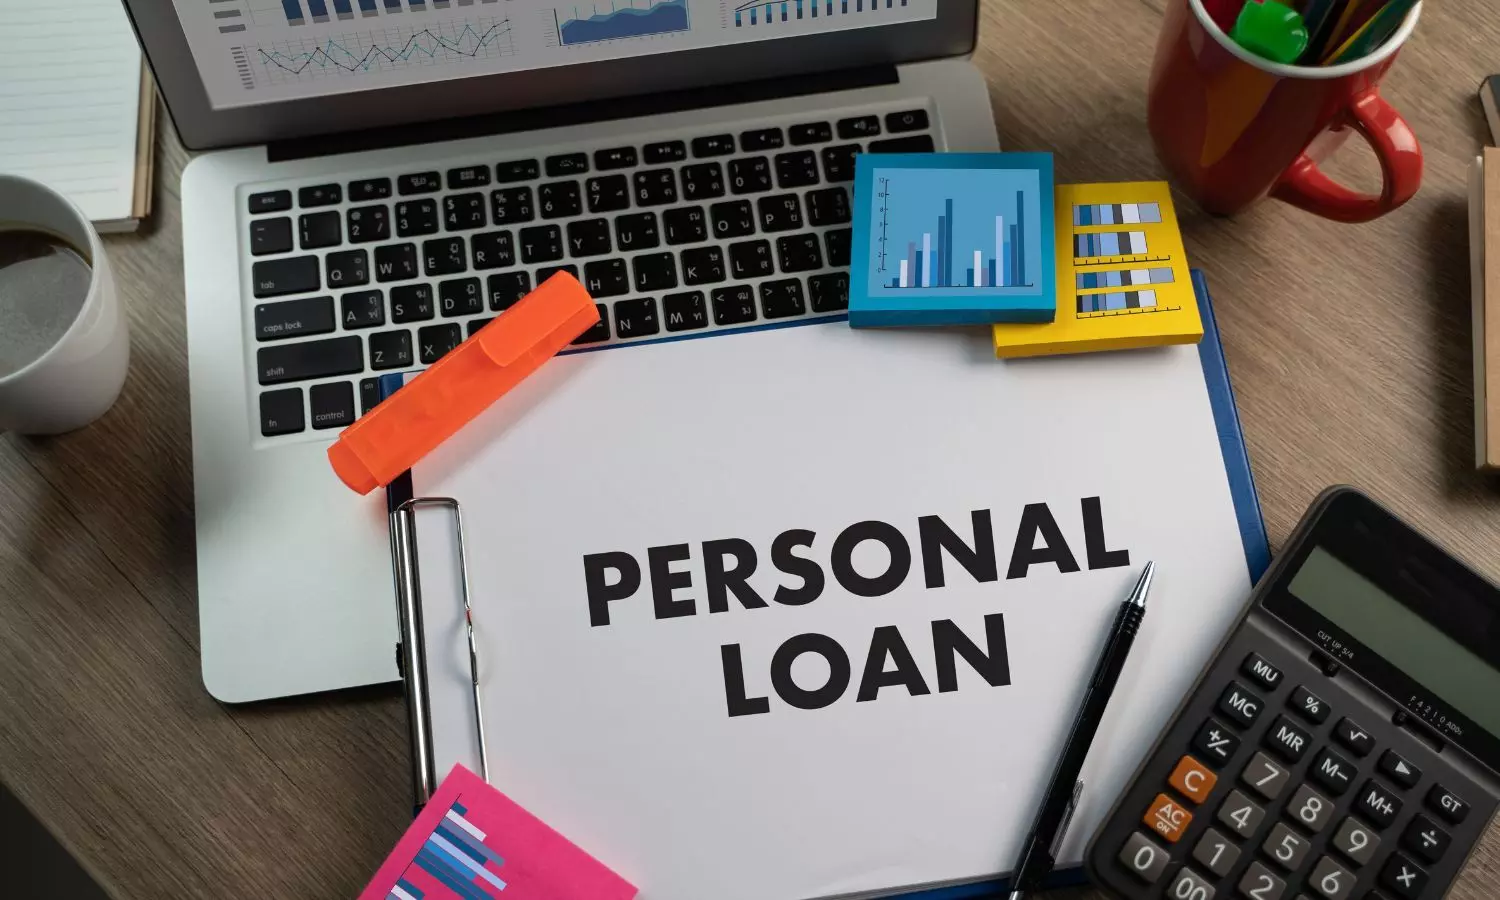 Understanding the benefits and risks of personal loans